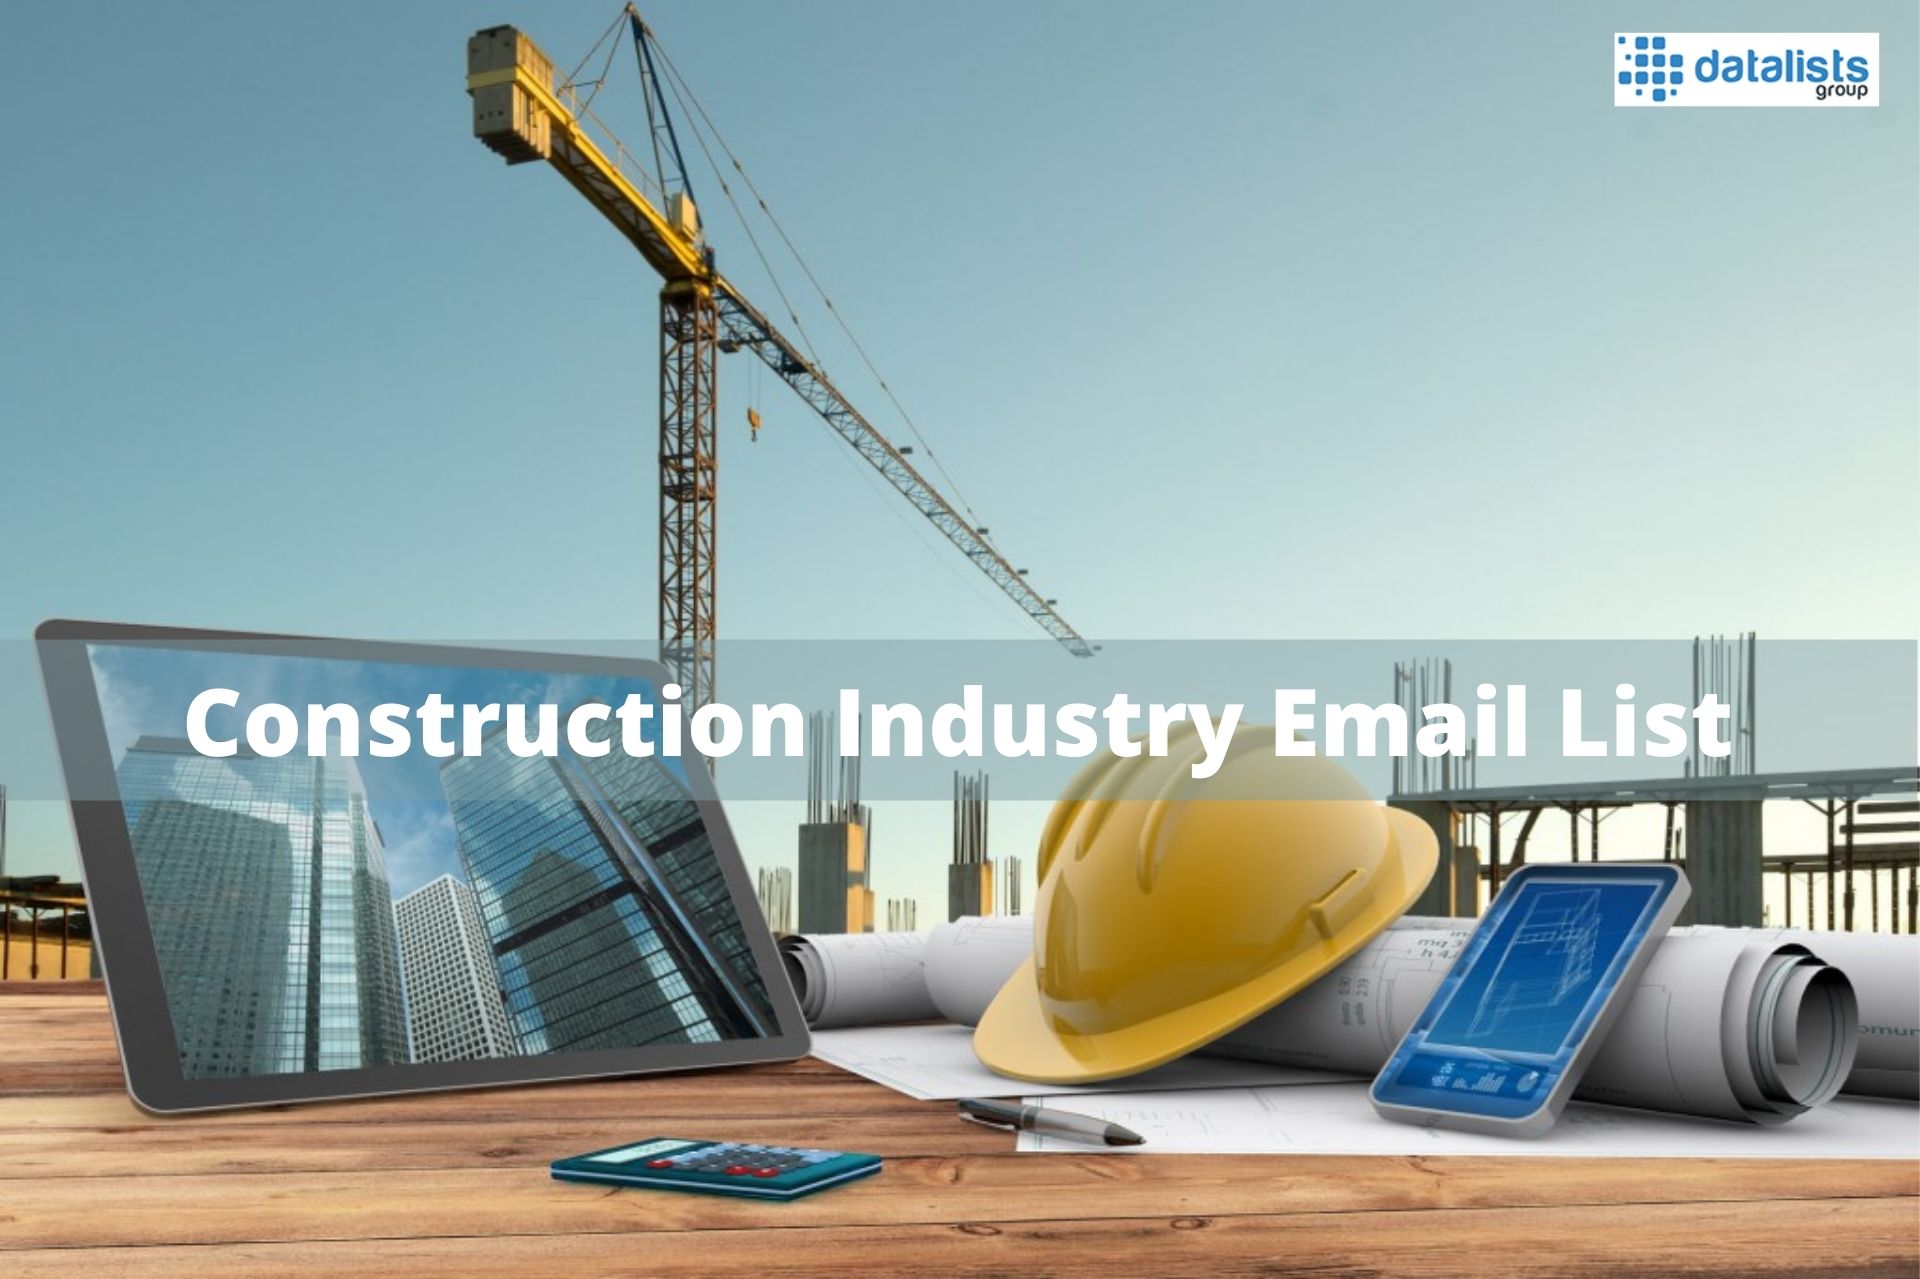 DataListsGroup Updated Their Construction Industry Email List for Successful Marketing Campaigns